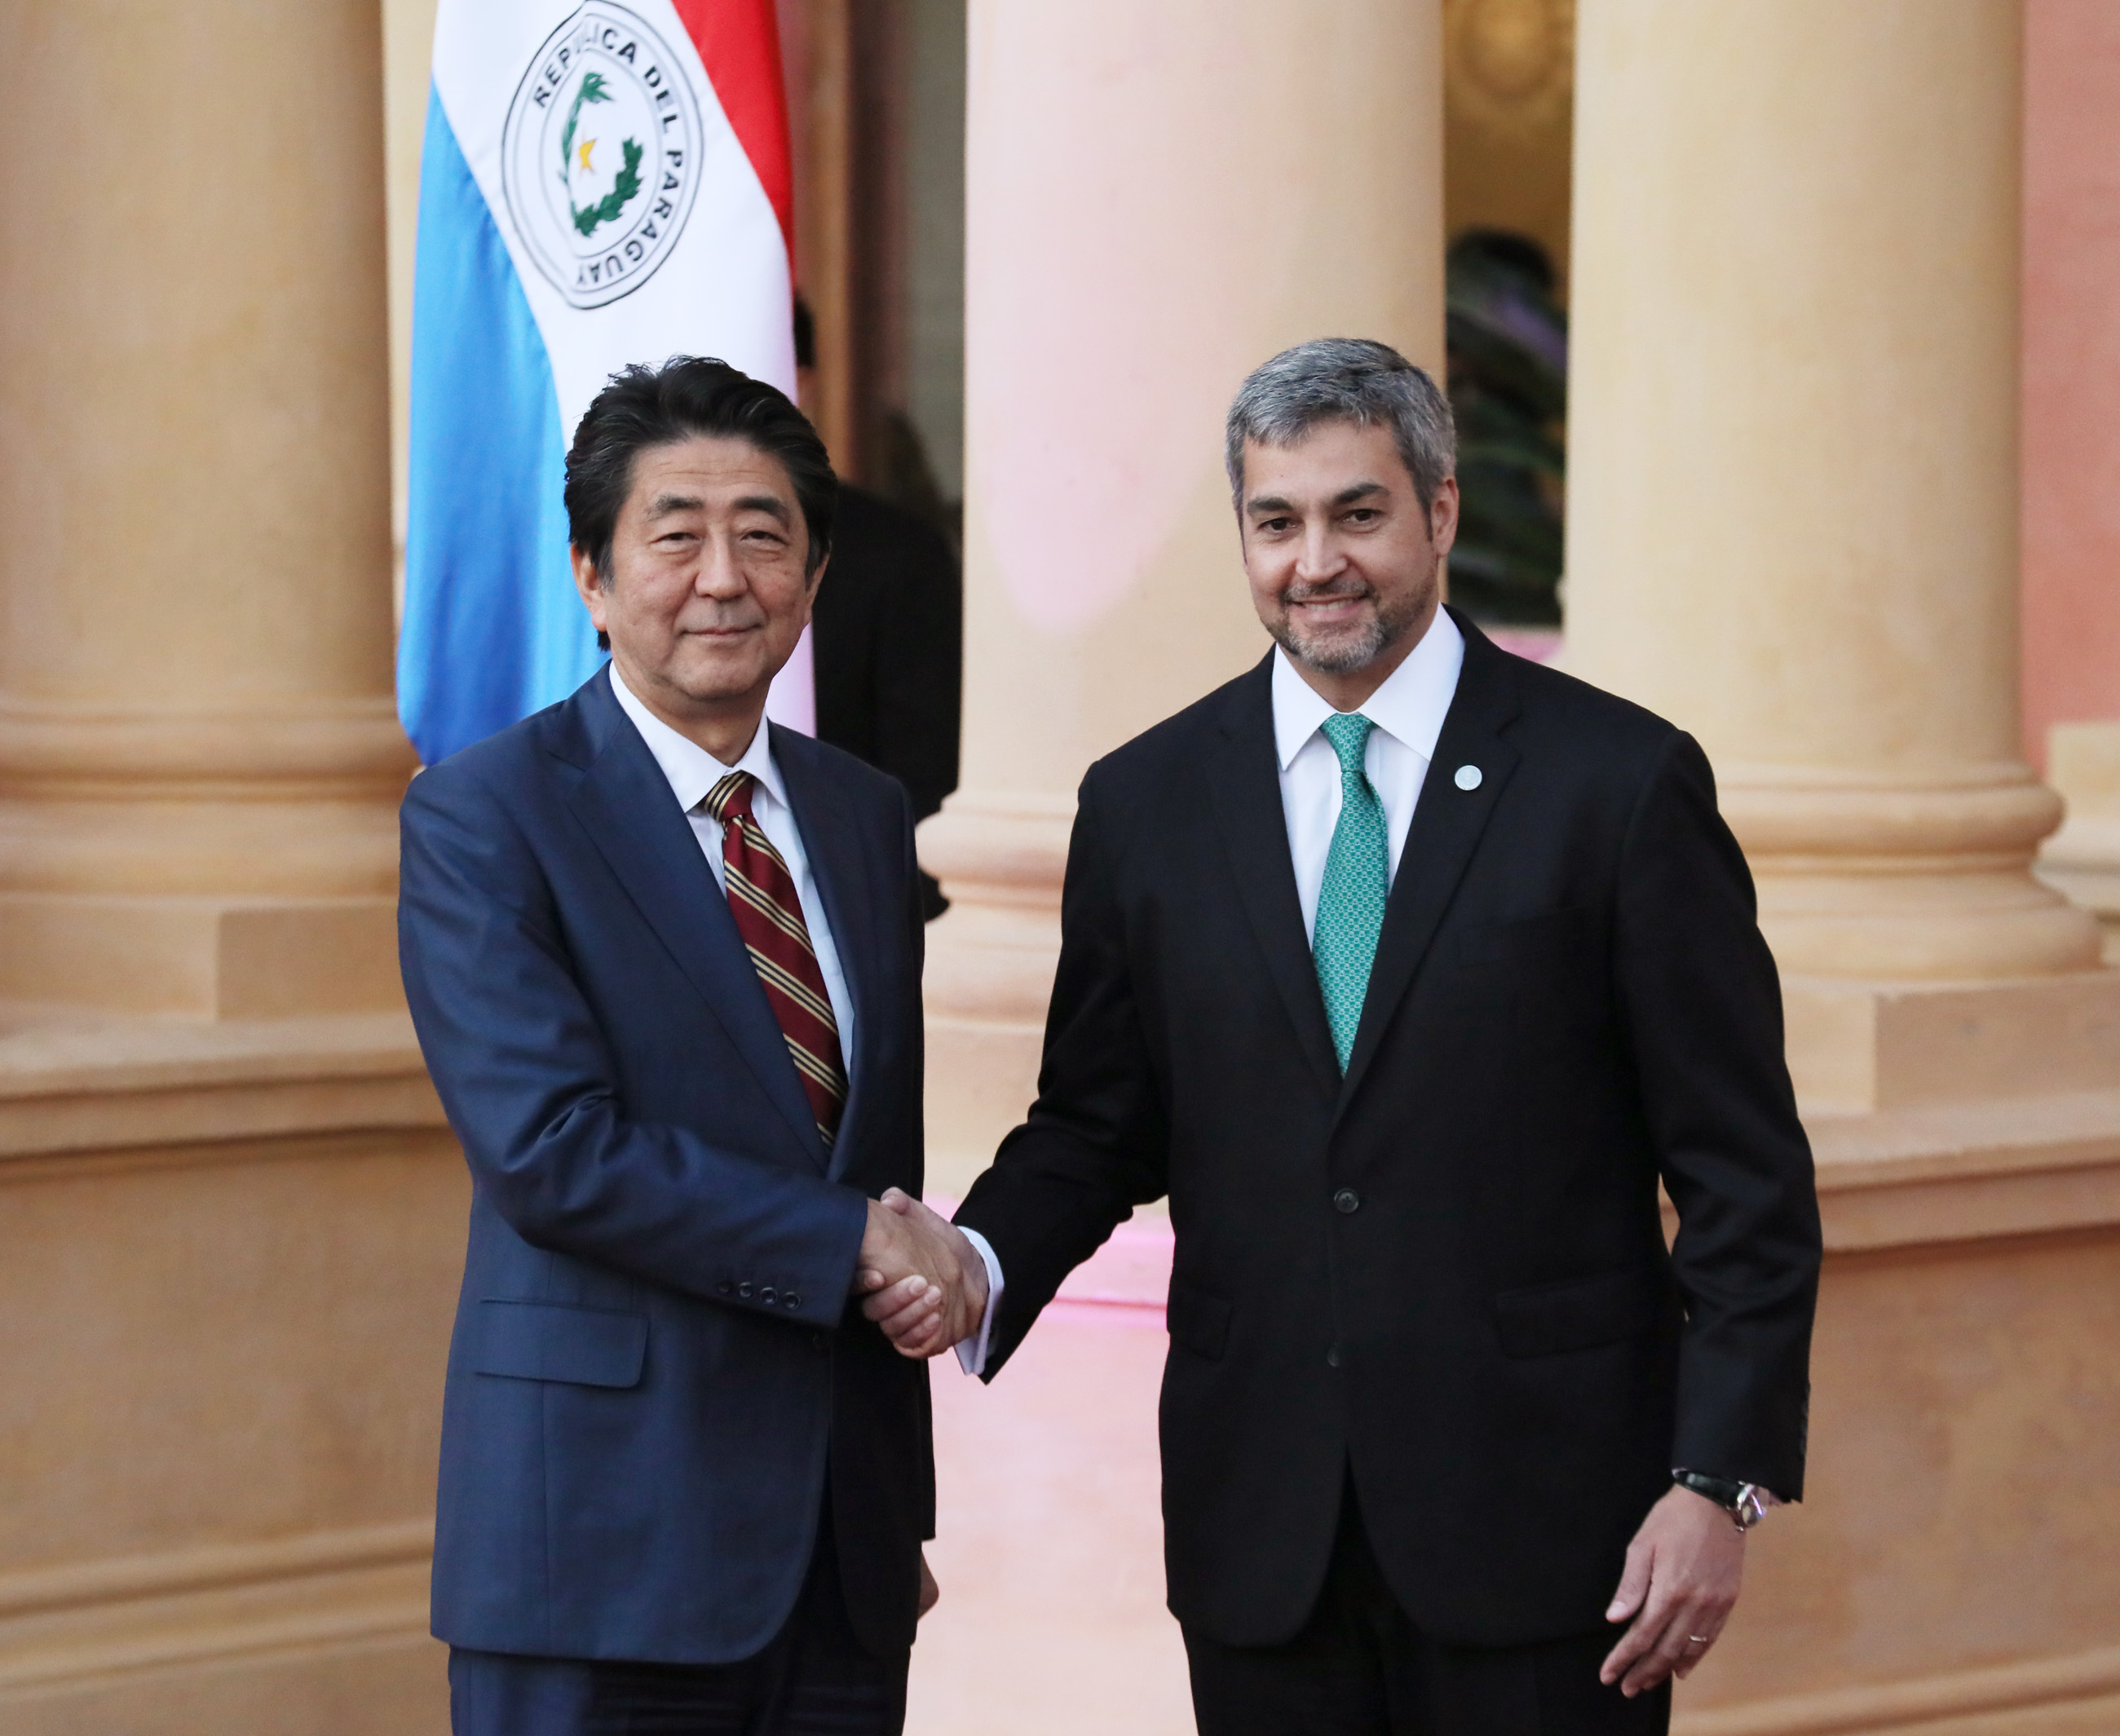 Photograph of the Prime Minister shaking hands with the President of Paraguay